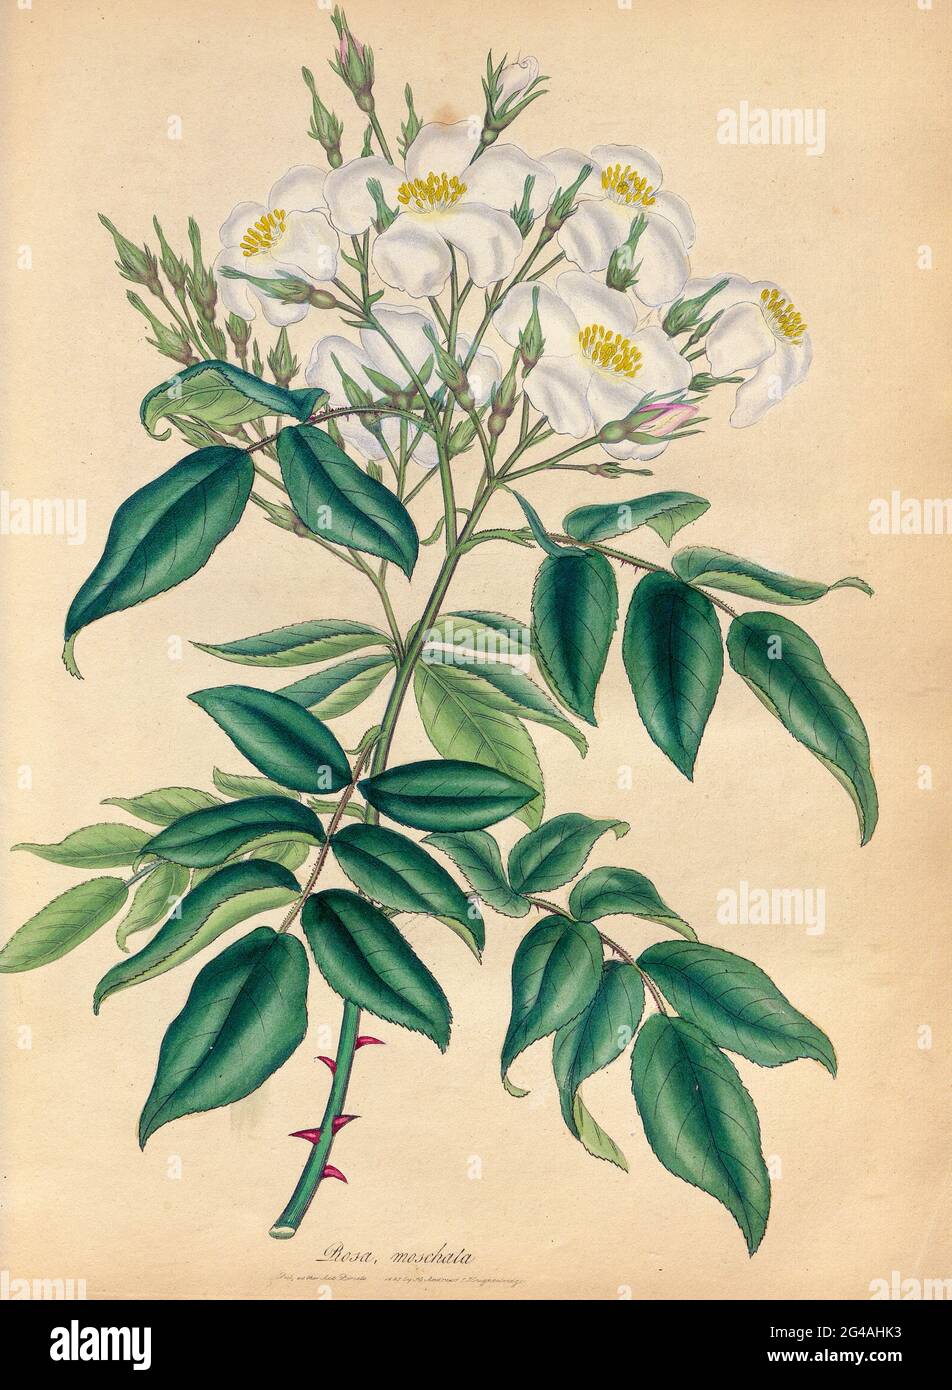 ROSA moschata, Musk Rose From the book Roses, or, A monograph of the genus Rosa : containing coloured figures of all the known species and beautiful varieties, drawn, engraved, described, and coloured, from living plants. by Andrews, Henry Charles, Published in London : printed by R. Taylor and Co. ; 1805. Stock Photo